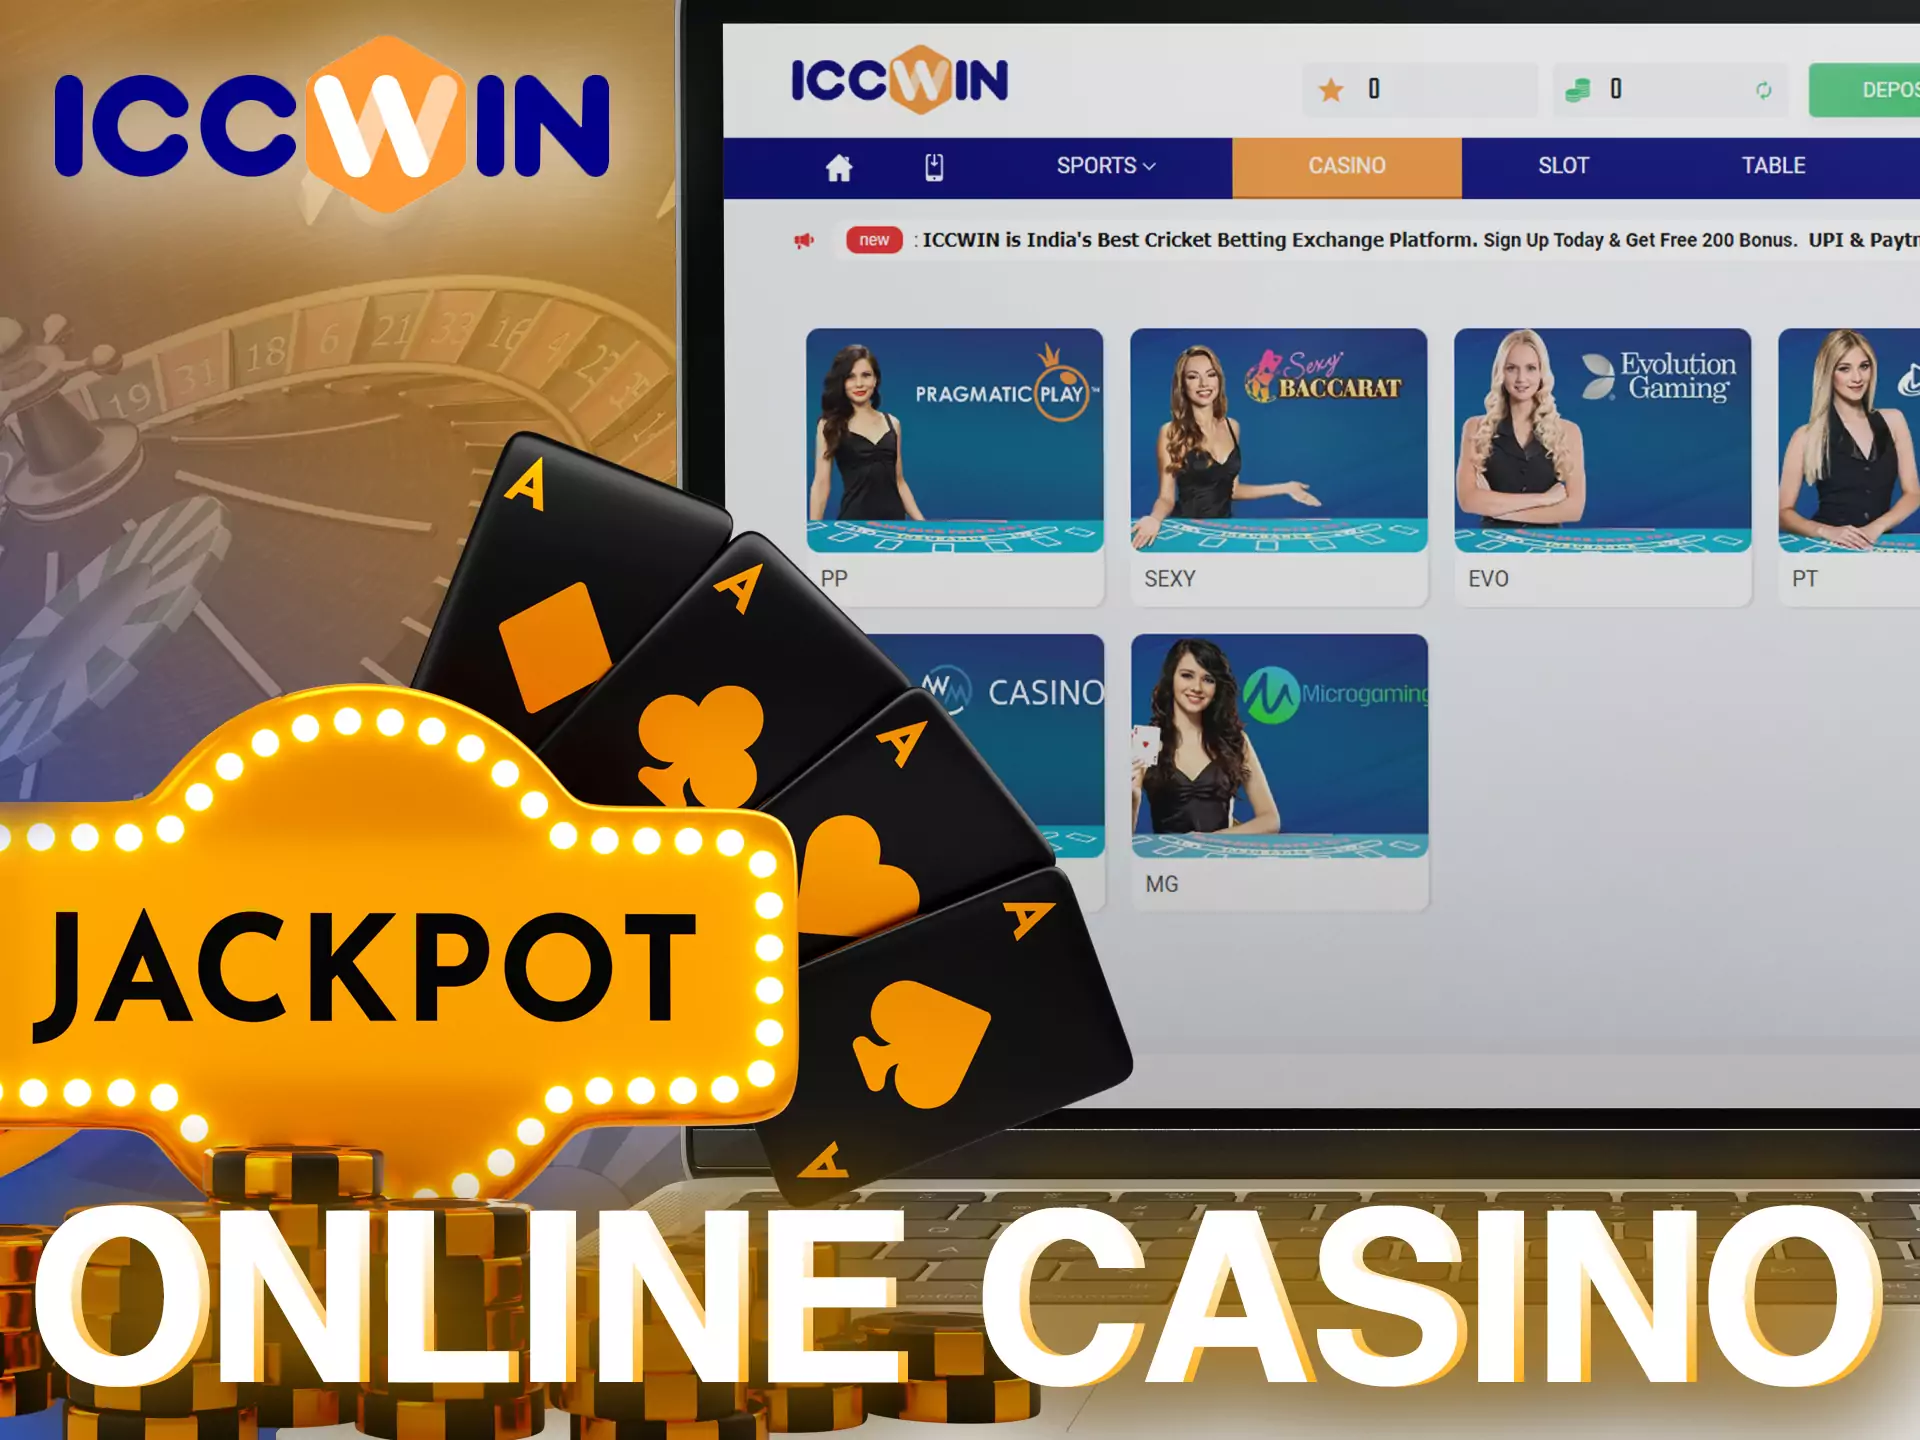 Online games on the ICCWin website include slots, poker and other card games.